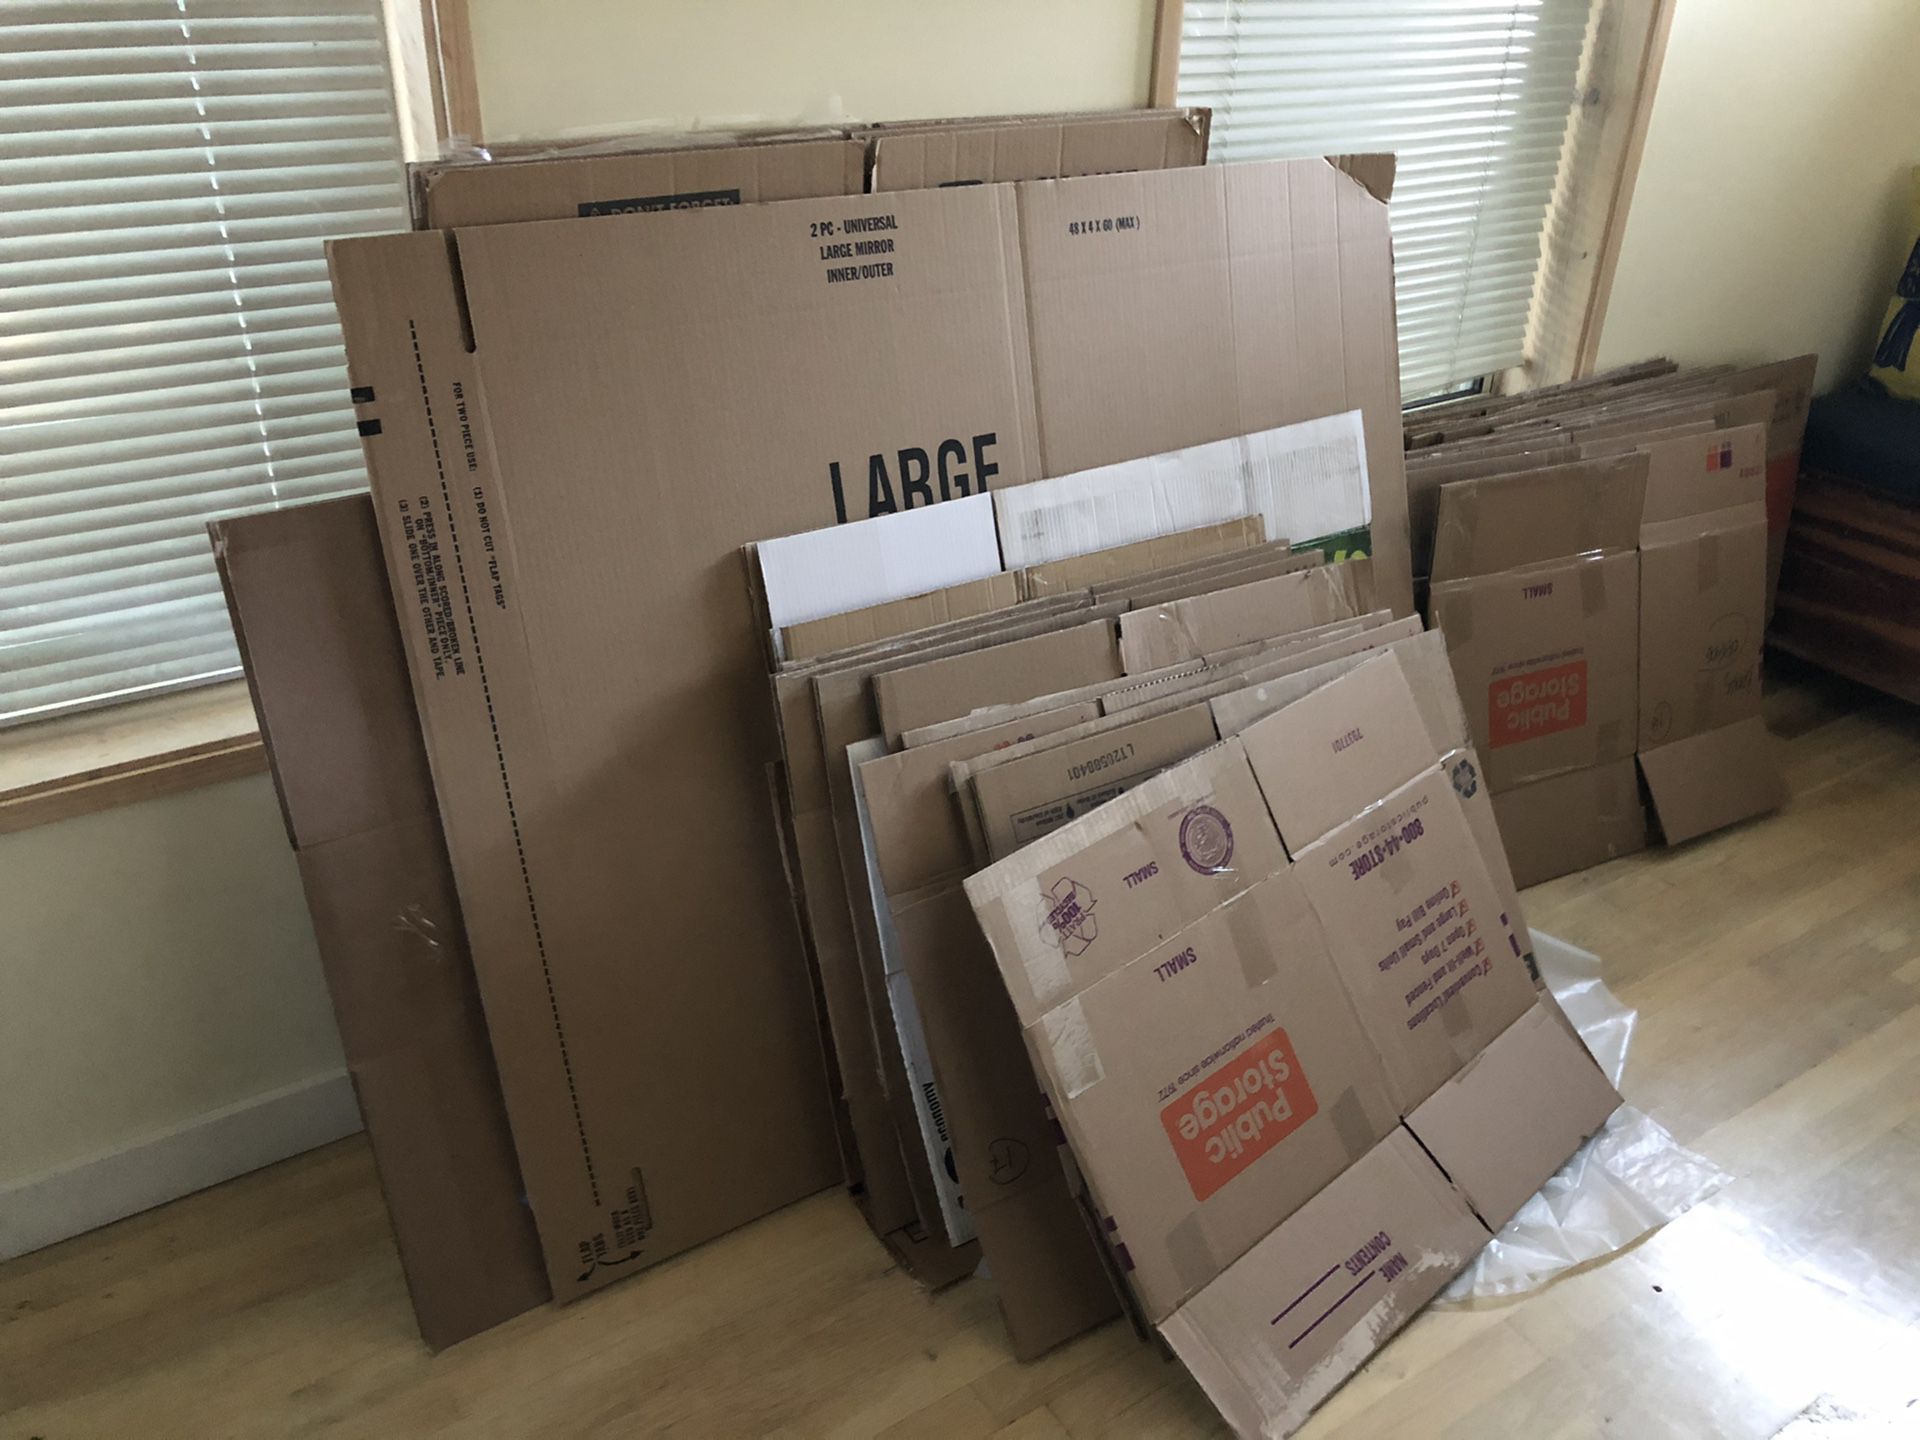 FREE MOVING BOXES - All sizes, most one move old. No bugs, I promise!